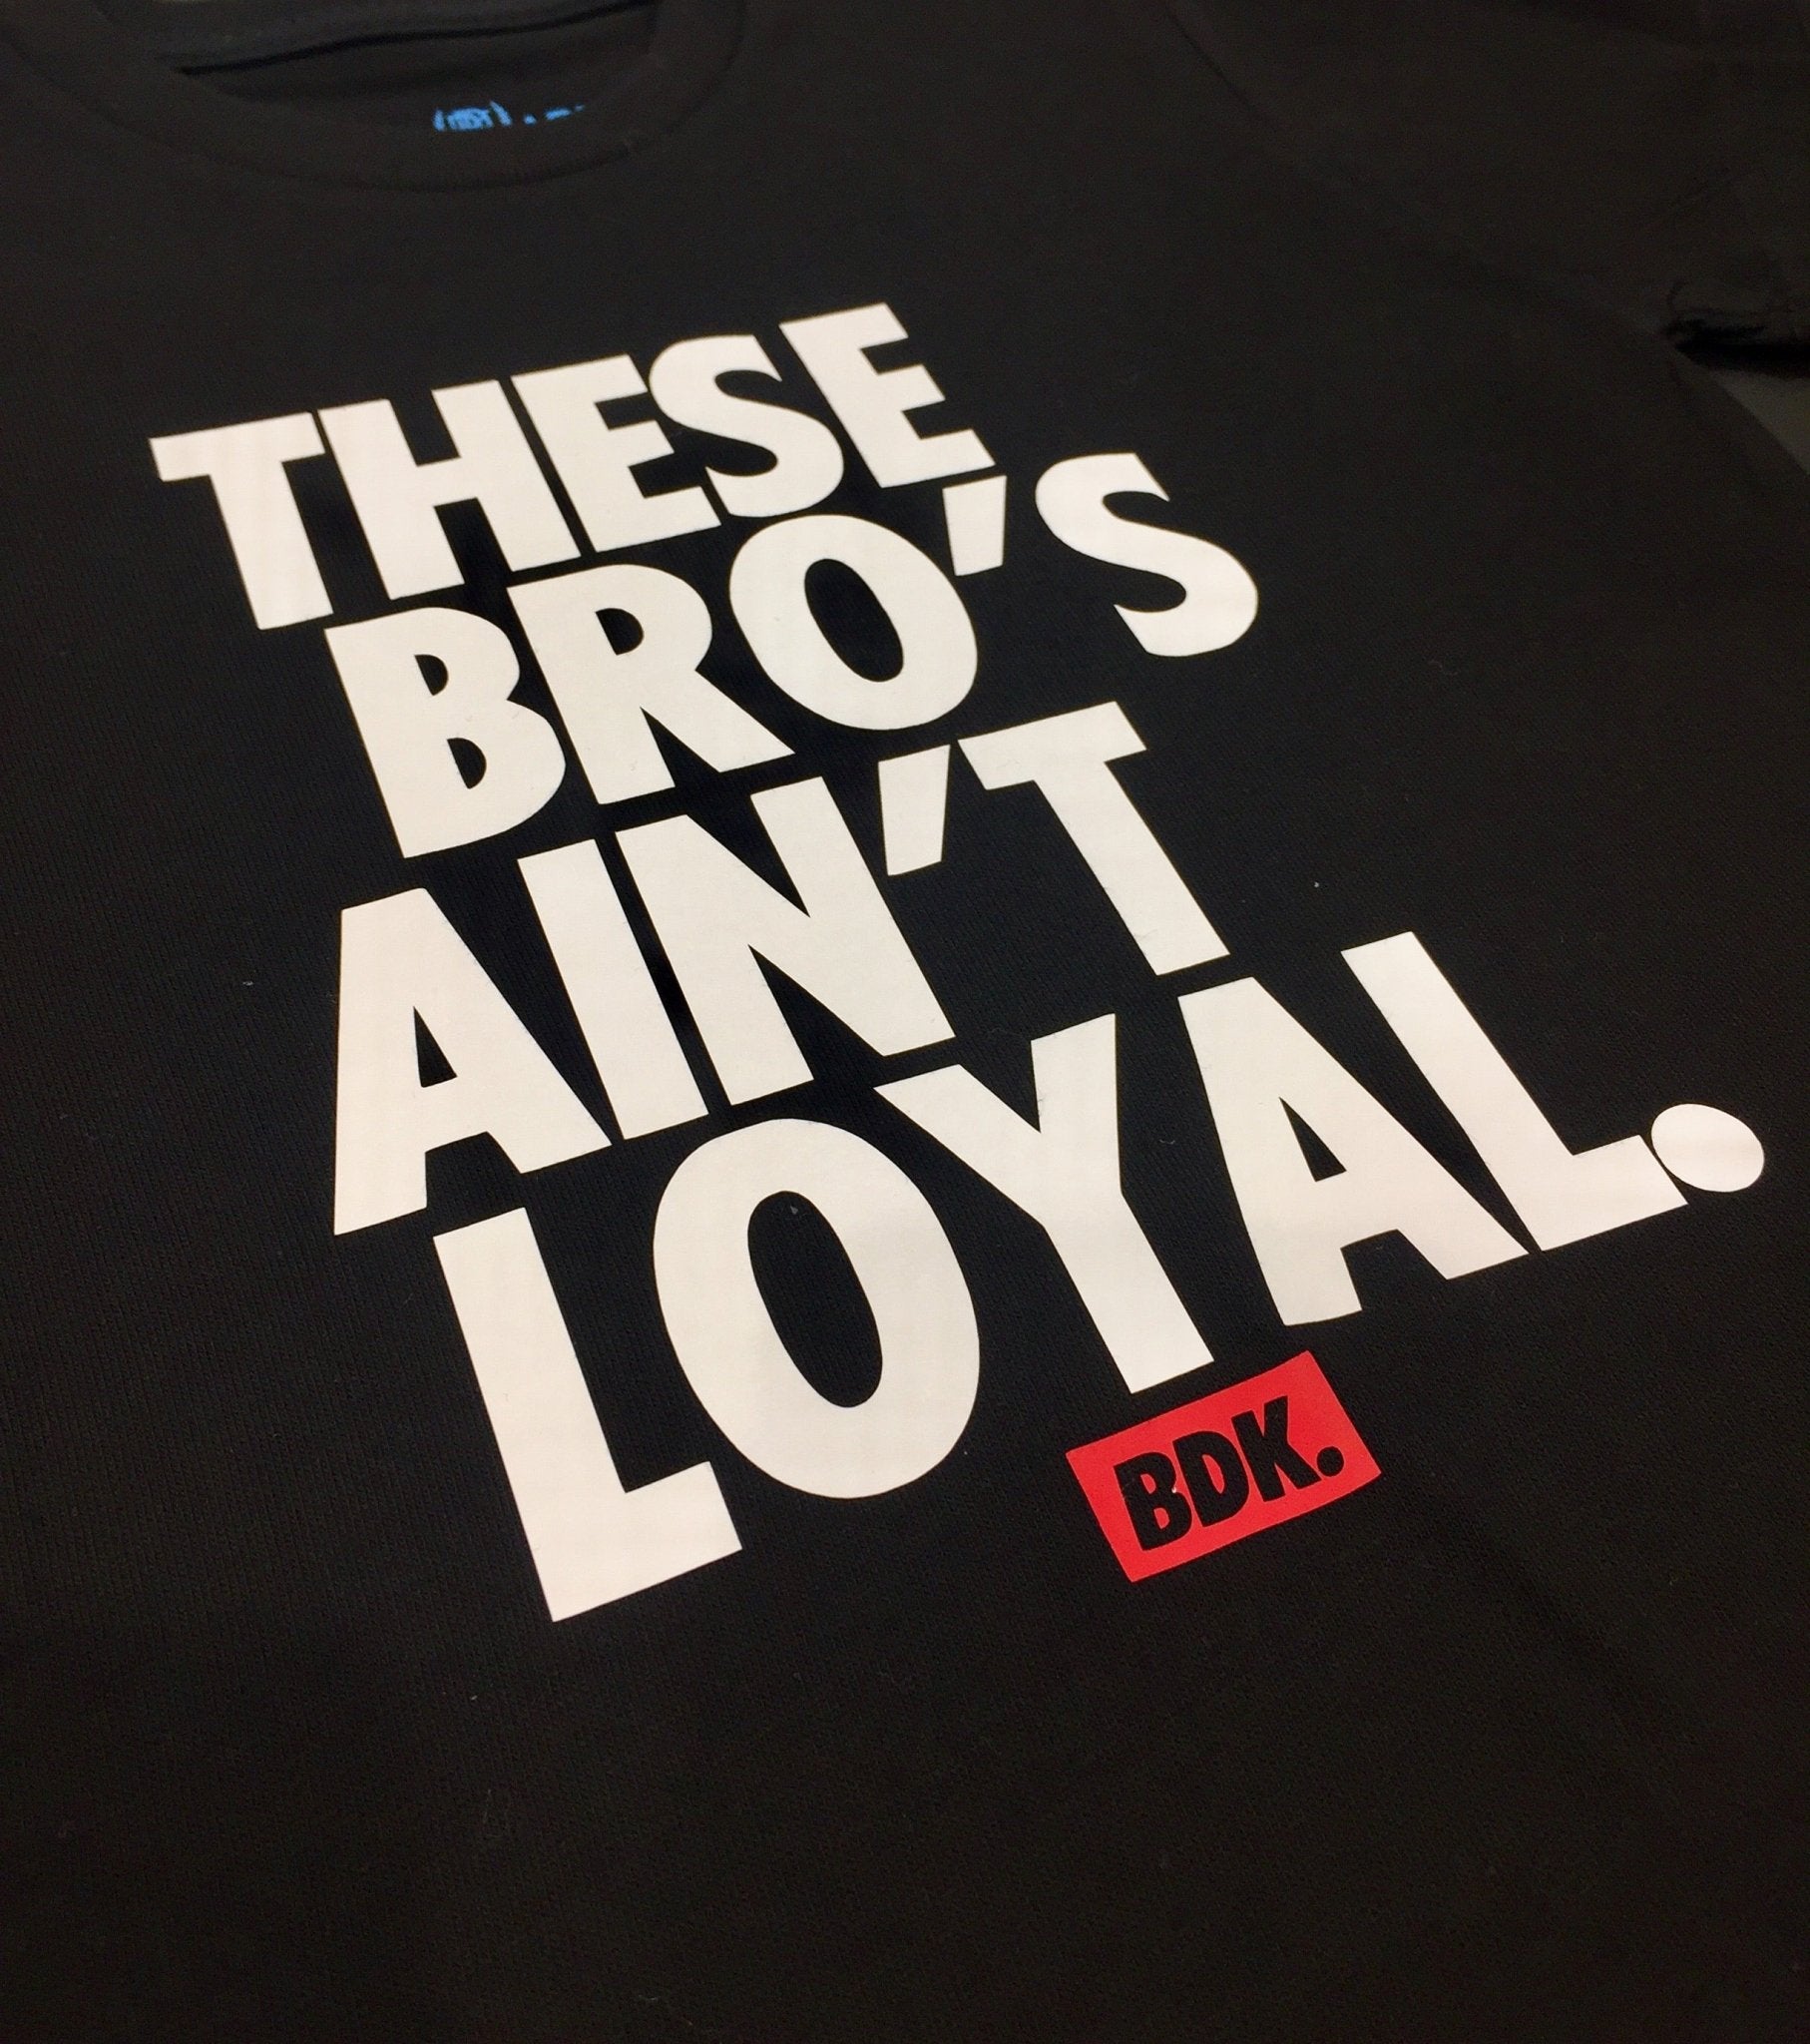 "These Bro's" T Shirt - Babahlu Kids